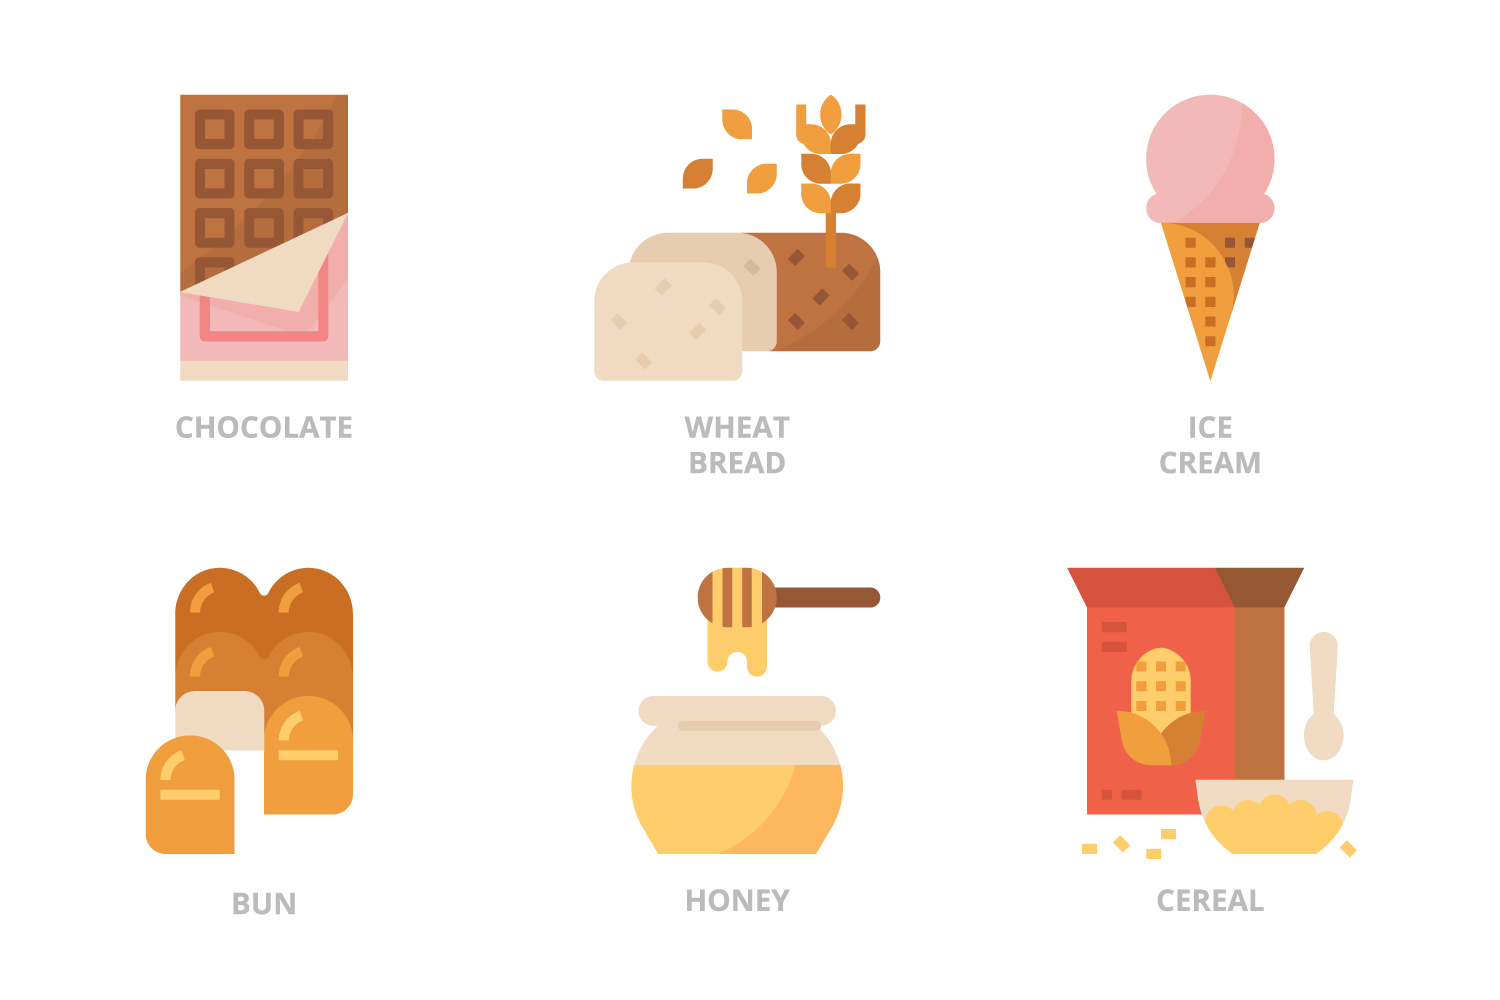 Bunch of different types of bread and ice cream.